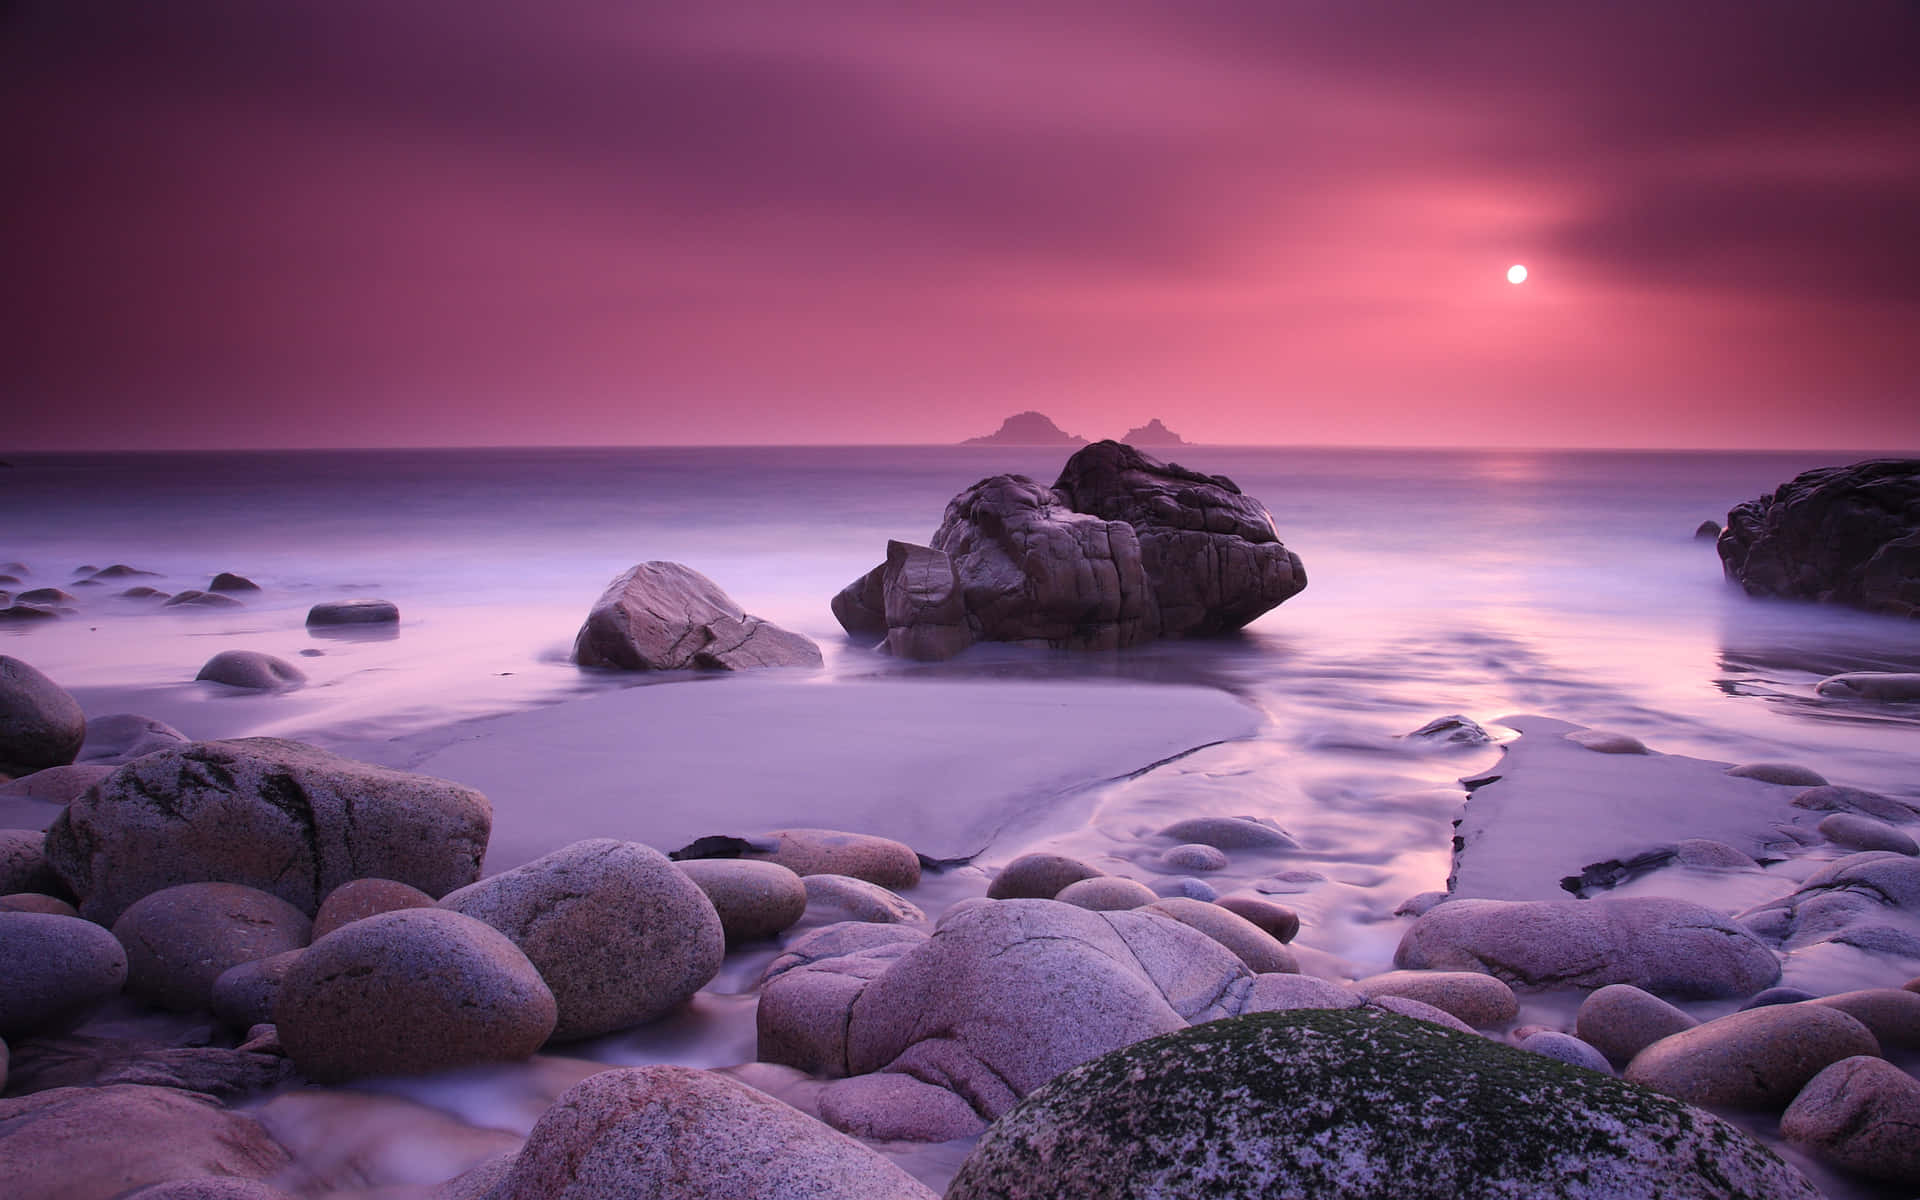 "A beautiful pink sky illuminated the shore of this beach during sunset." Wallpaper